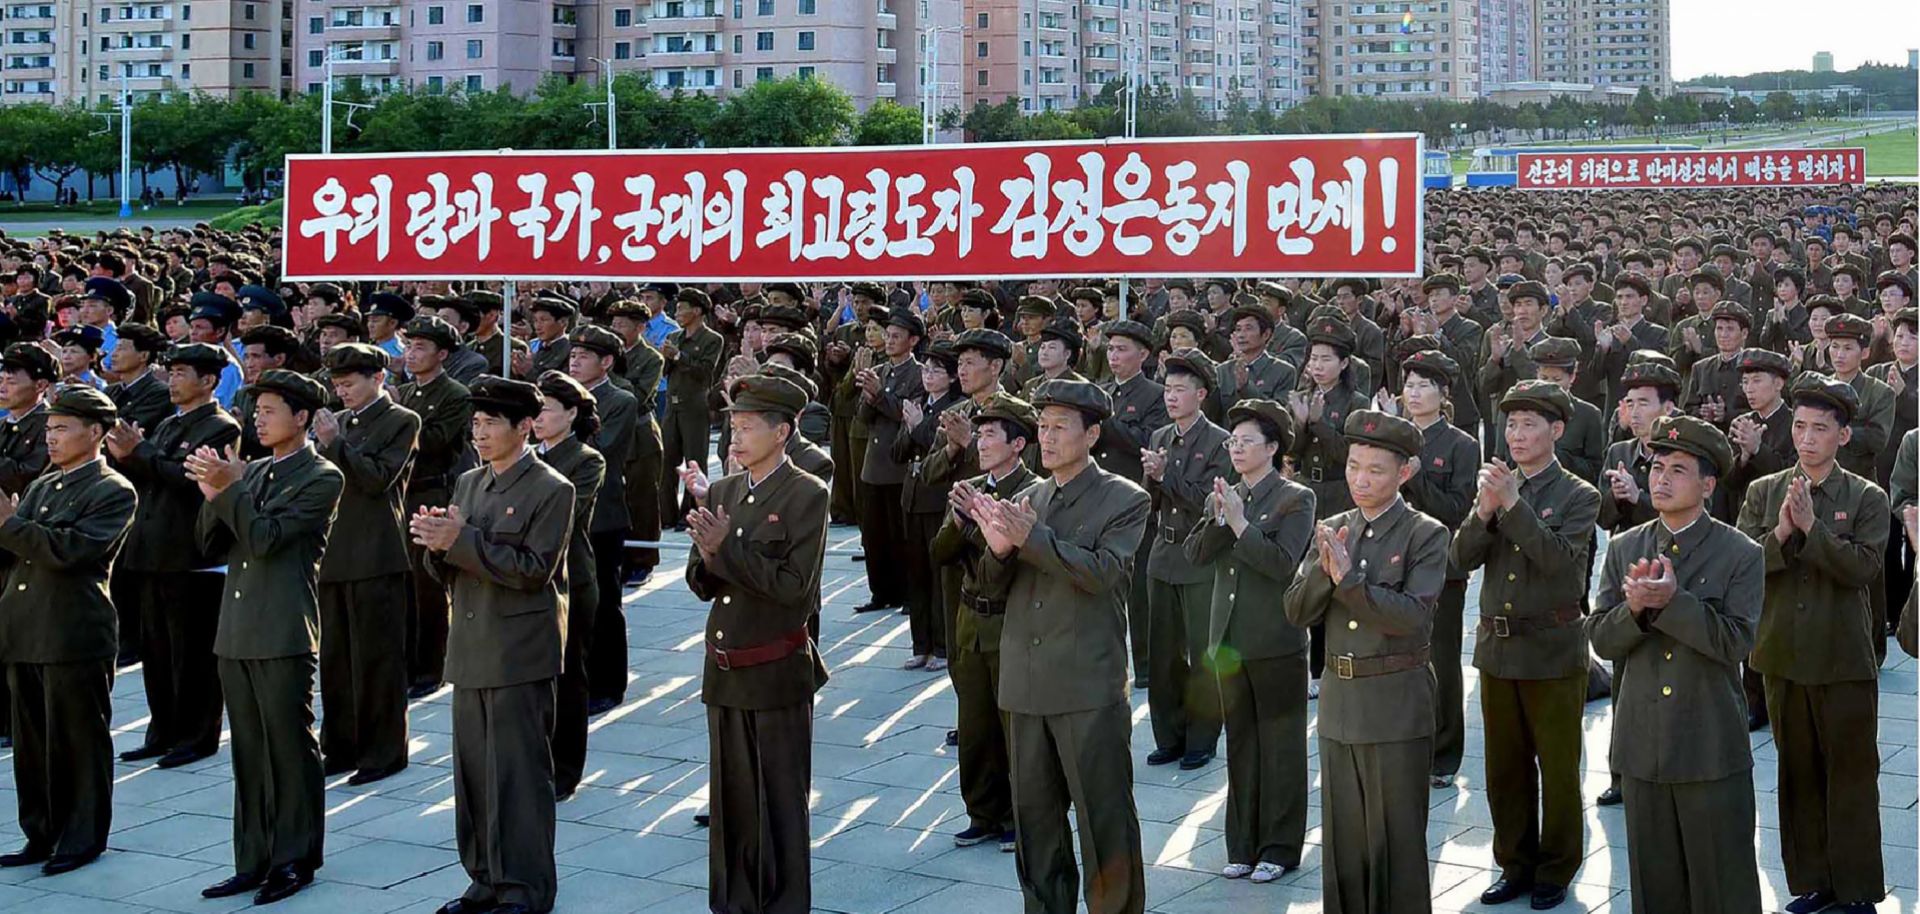 North Koreans rally in Pyongyang on Aug. 11 against U.N. Security Council sanctions. The United States has called for the Security Council to vote Sept. 11 on establishing sweeping new sanctions on North Korea.